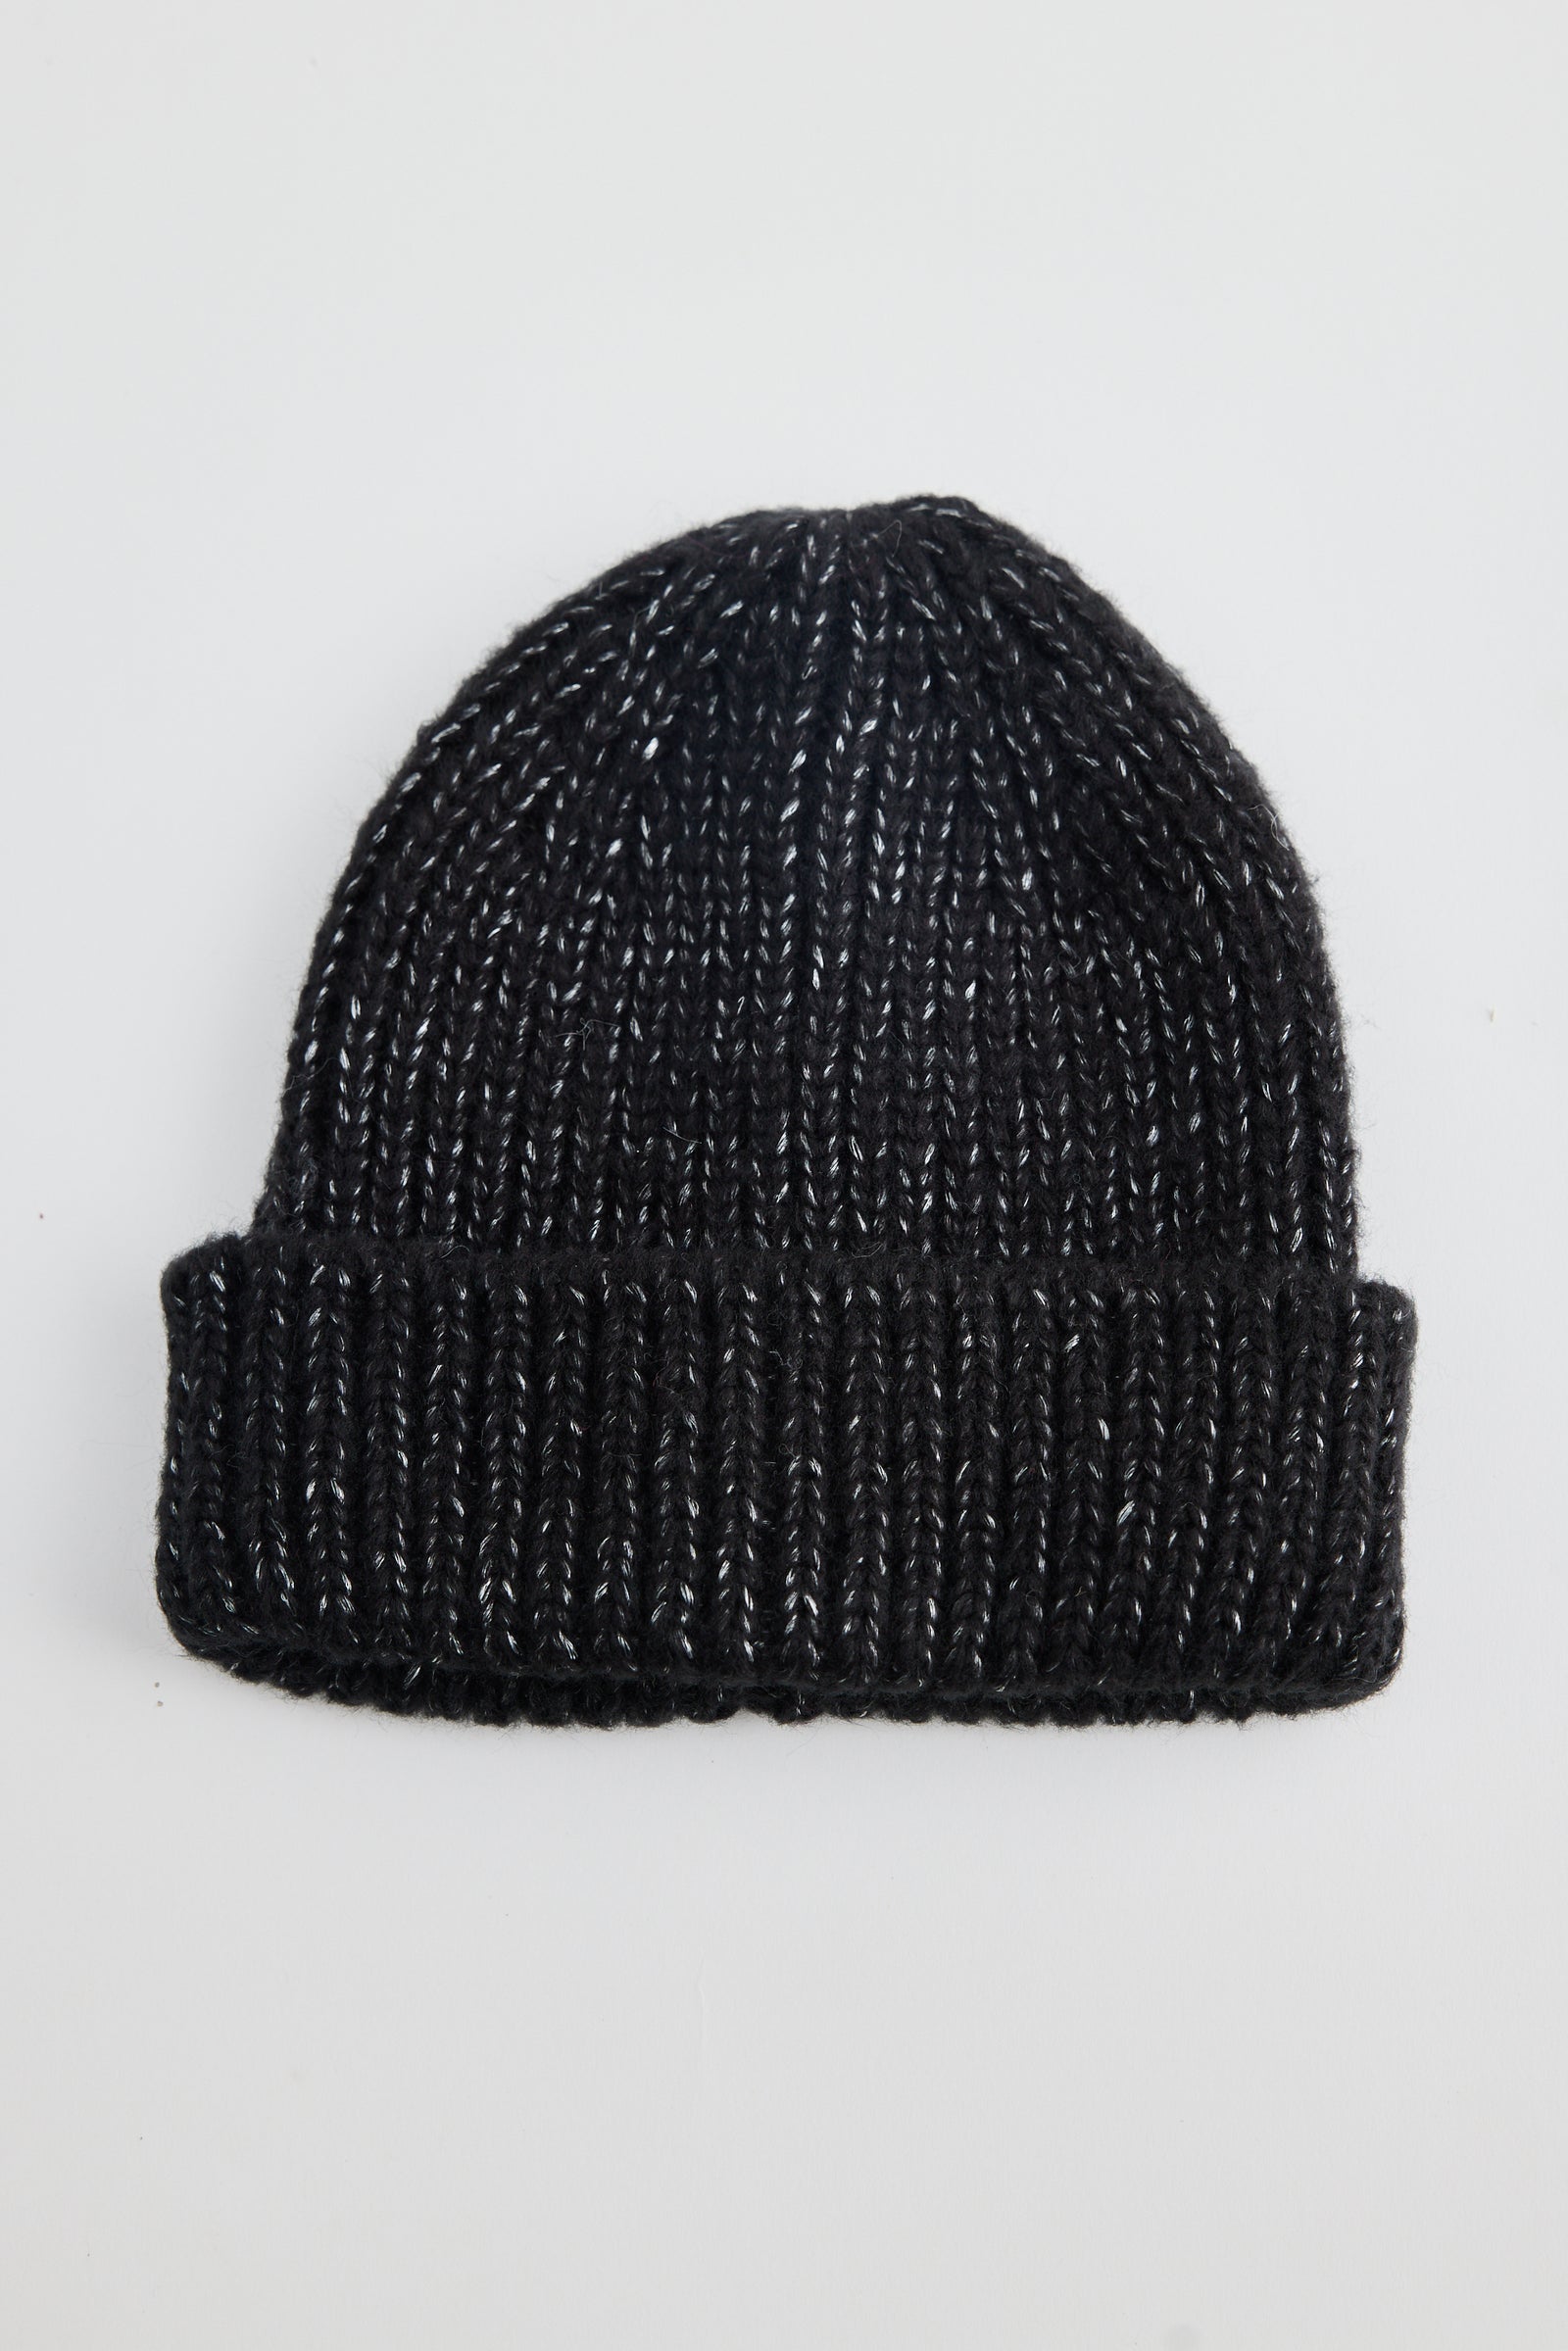 Winter Knit Beanie Hat, Silver and Black by Holiday clothing